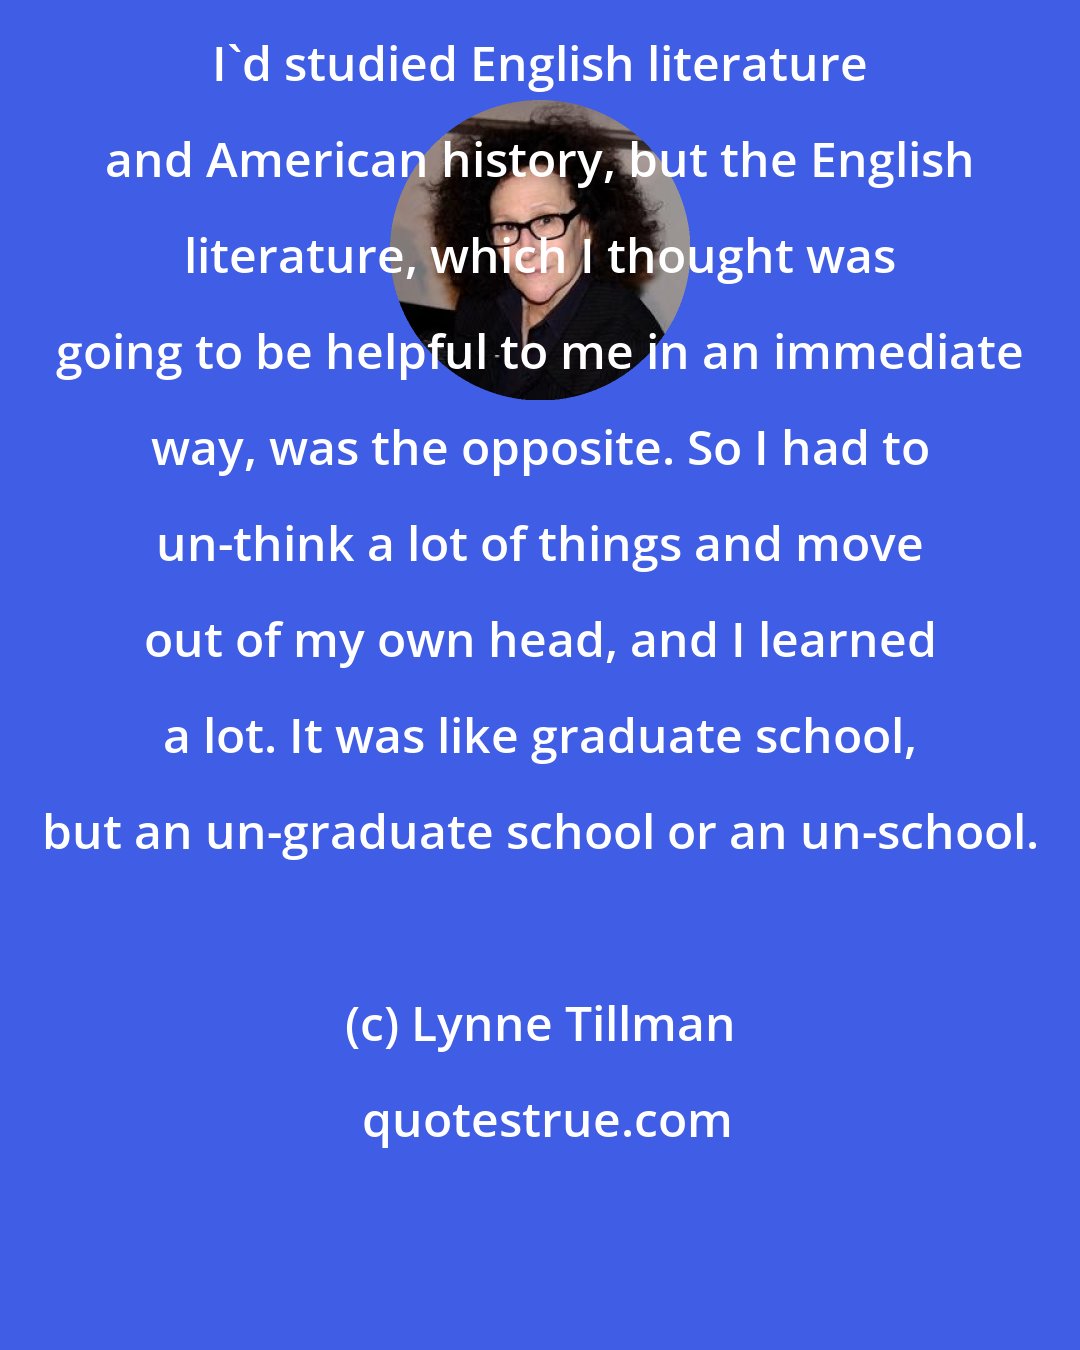 Lynne Tillman: I'd studied English literature and American history, but the English literature, which I thought was going to be helpful to me in an immediate way, was the opposite. So I had to un-think a lot of things and move out of my own head, and I learned a lot. It was like graduate school, but an un-graduate school or an un-school.